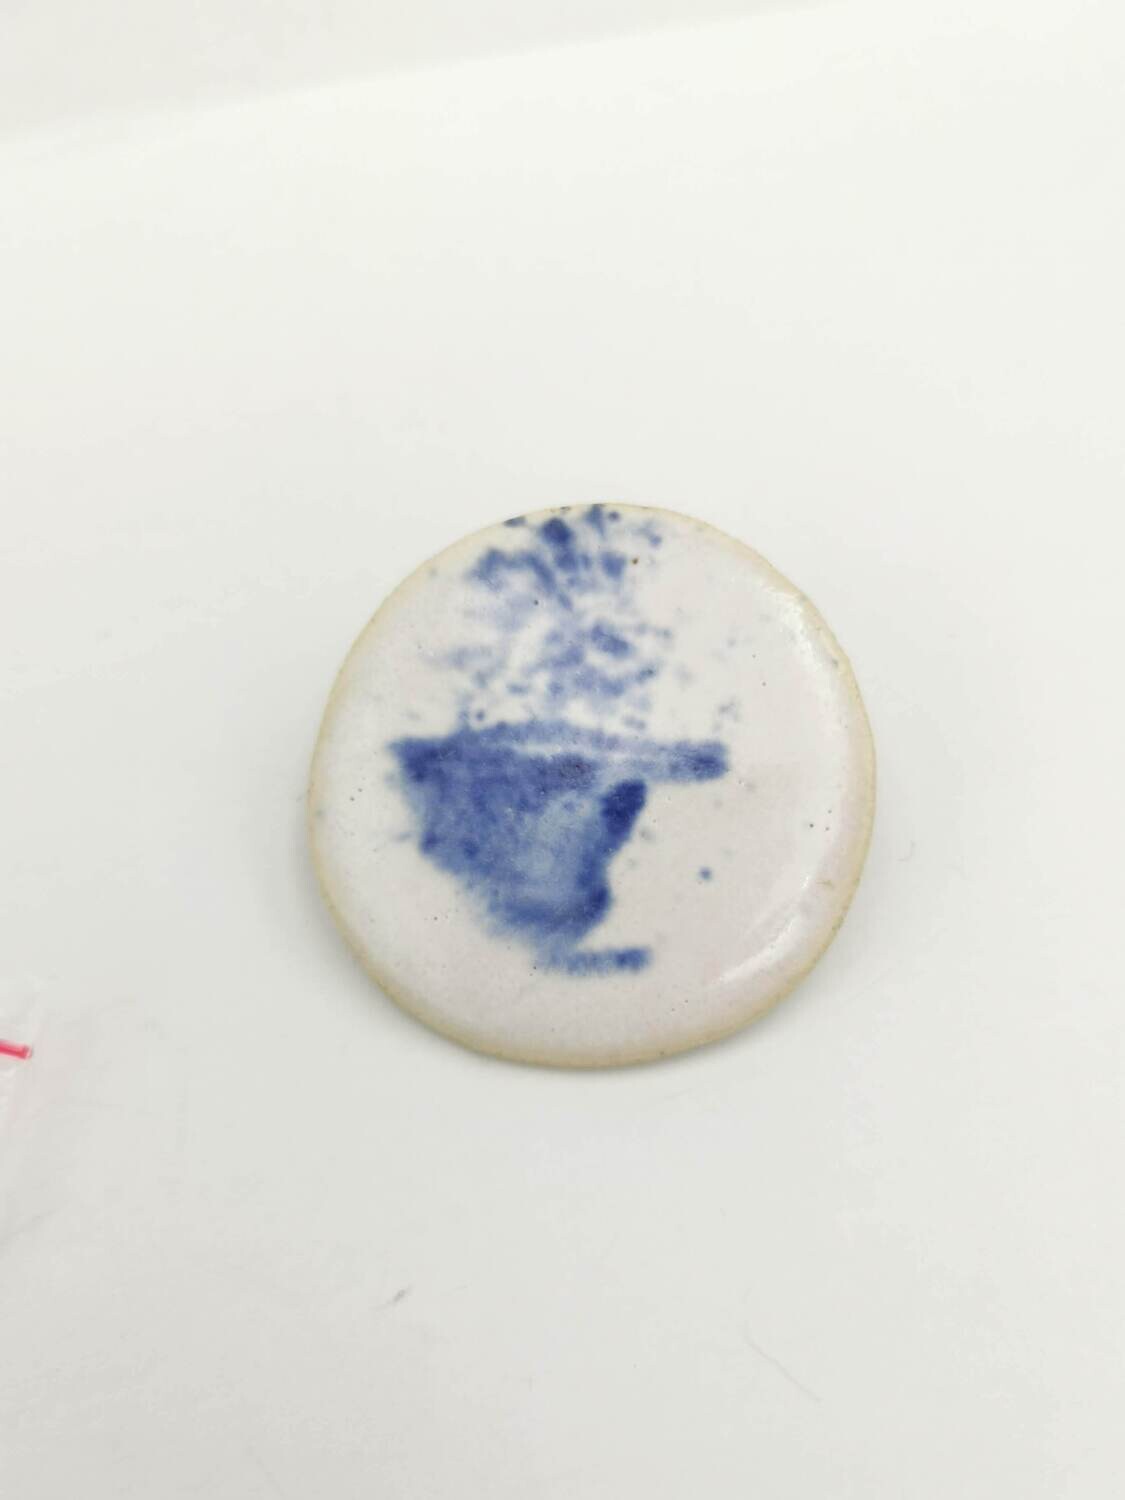 Porcelain Hand-painted Blue And White Brooch